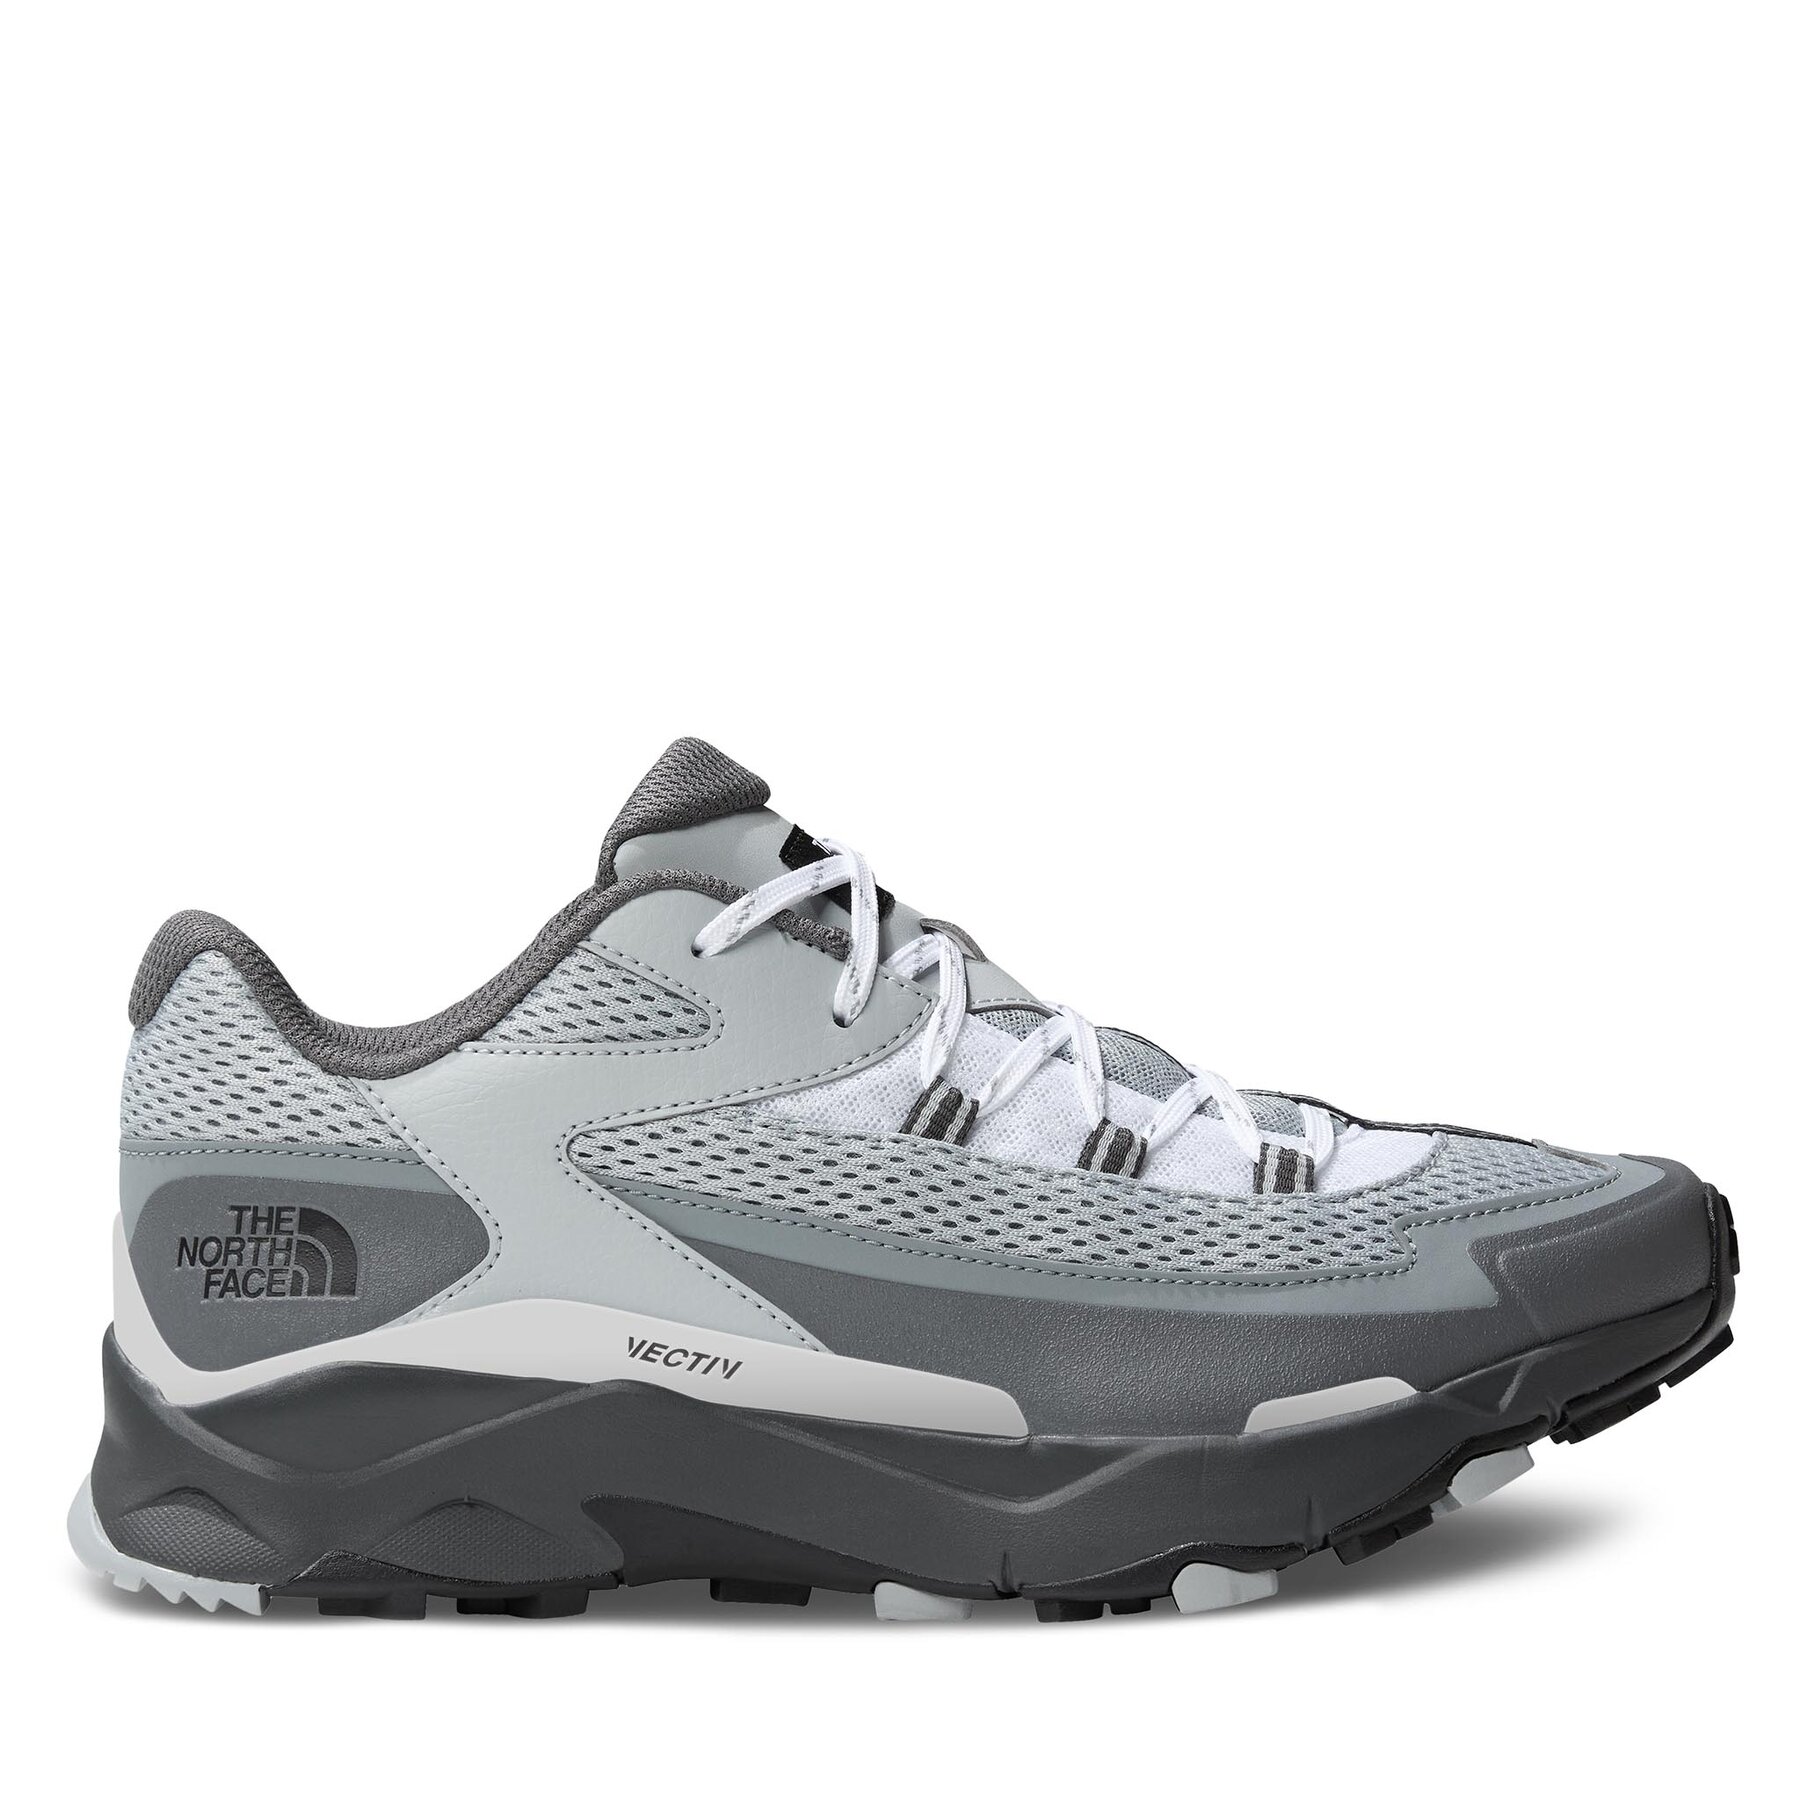 Sneakers The North Face Vectiv Taraval NF0A52Q1RO51 Rise Grey/Smoked P von The North Face